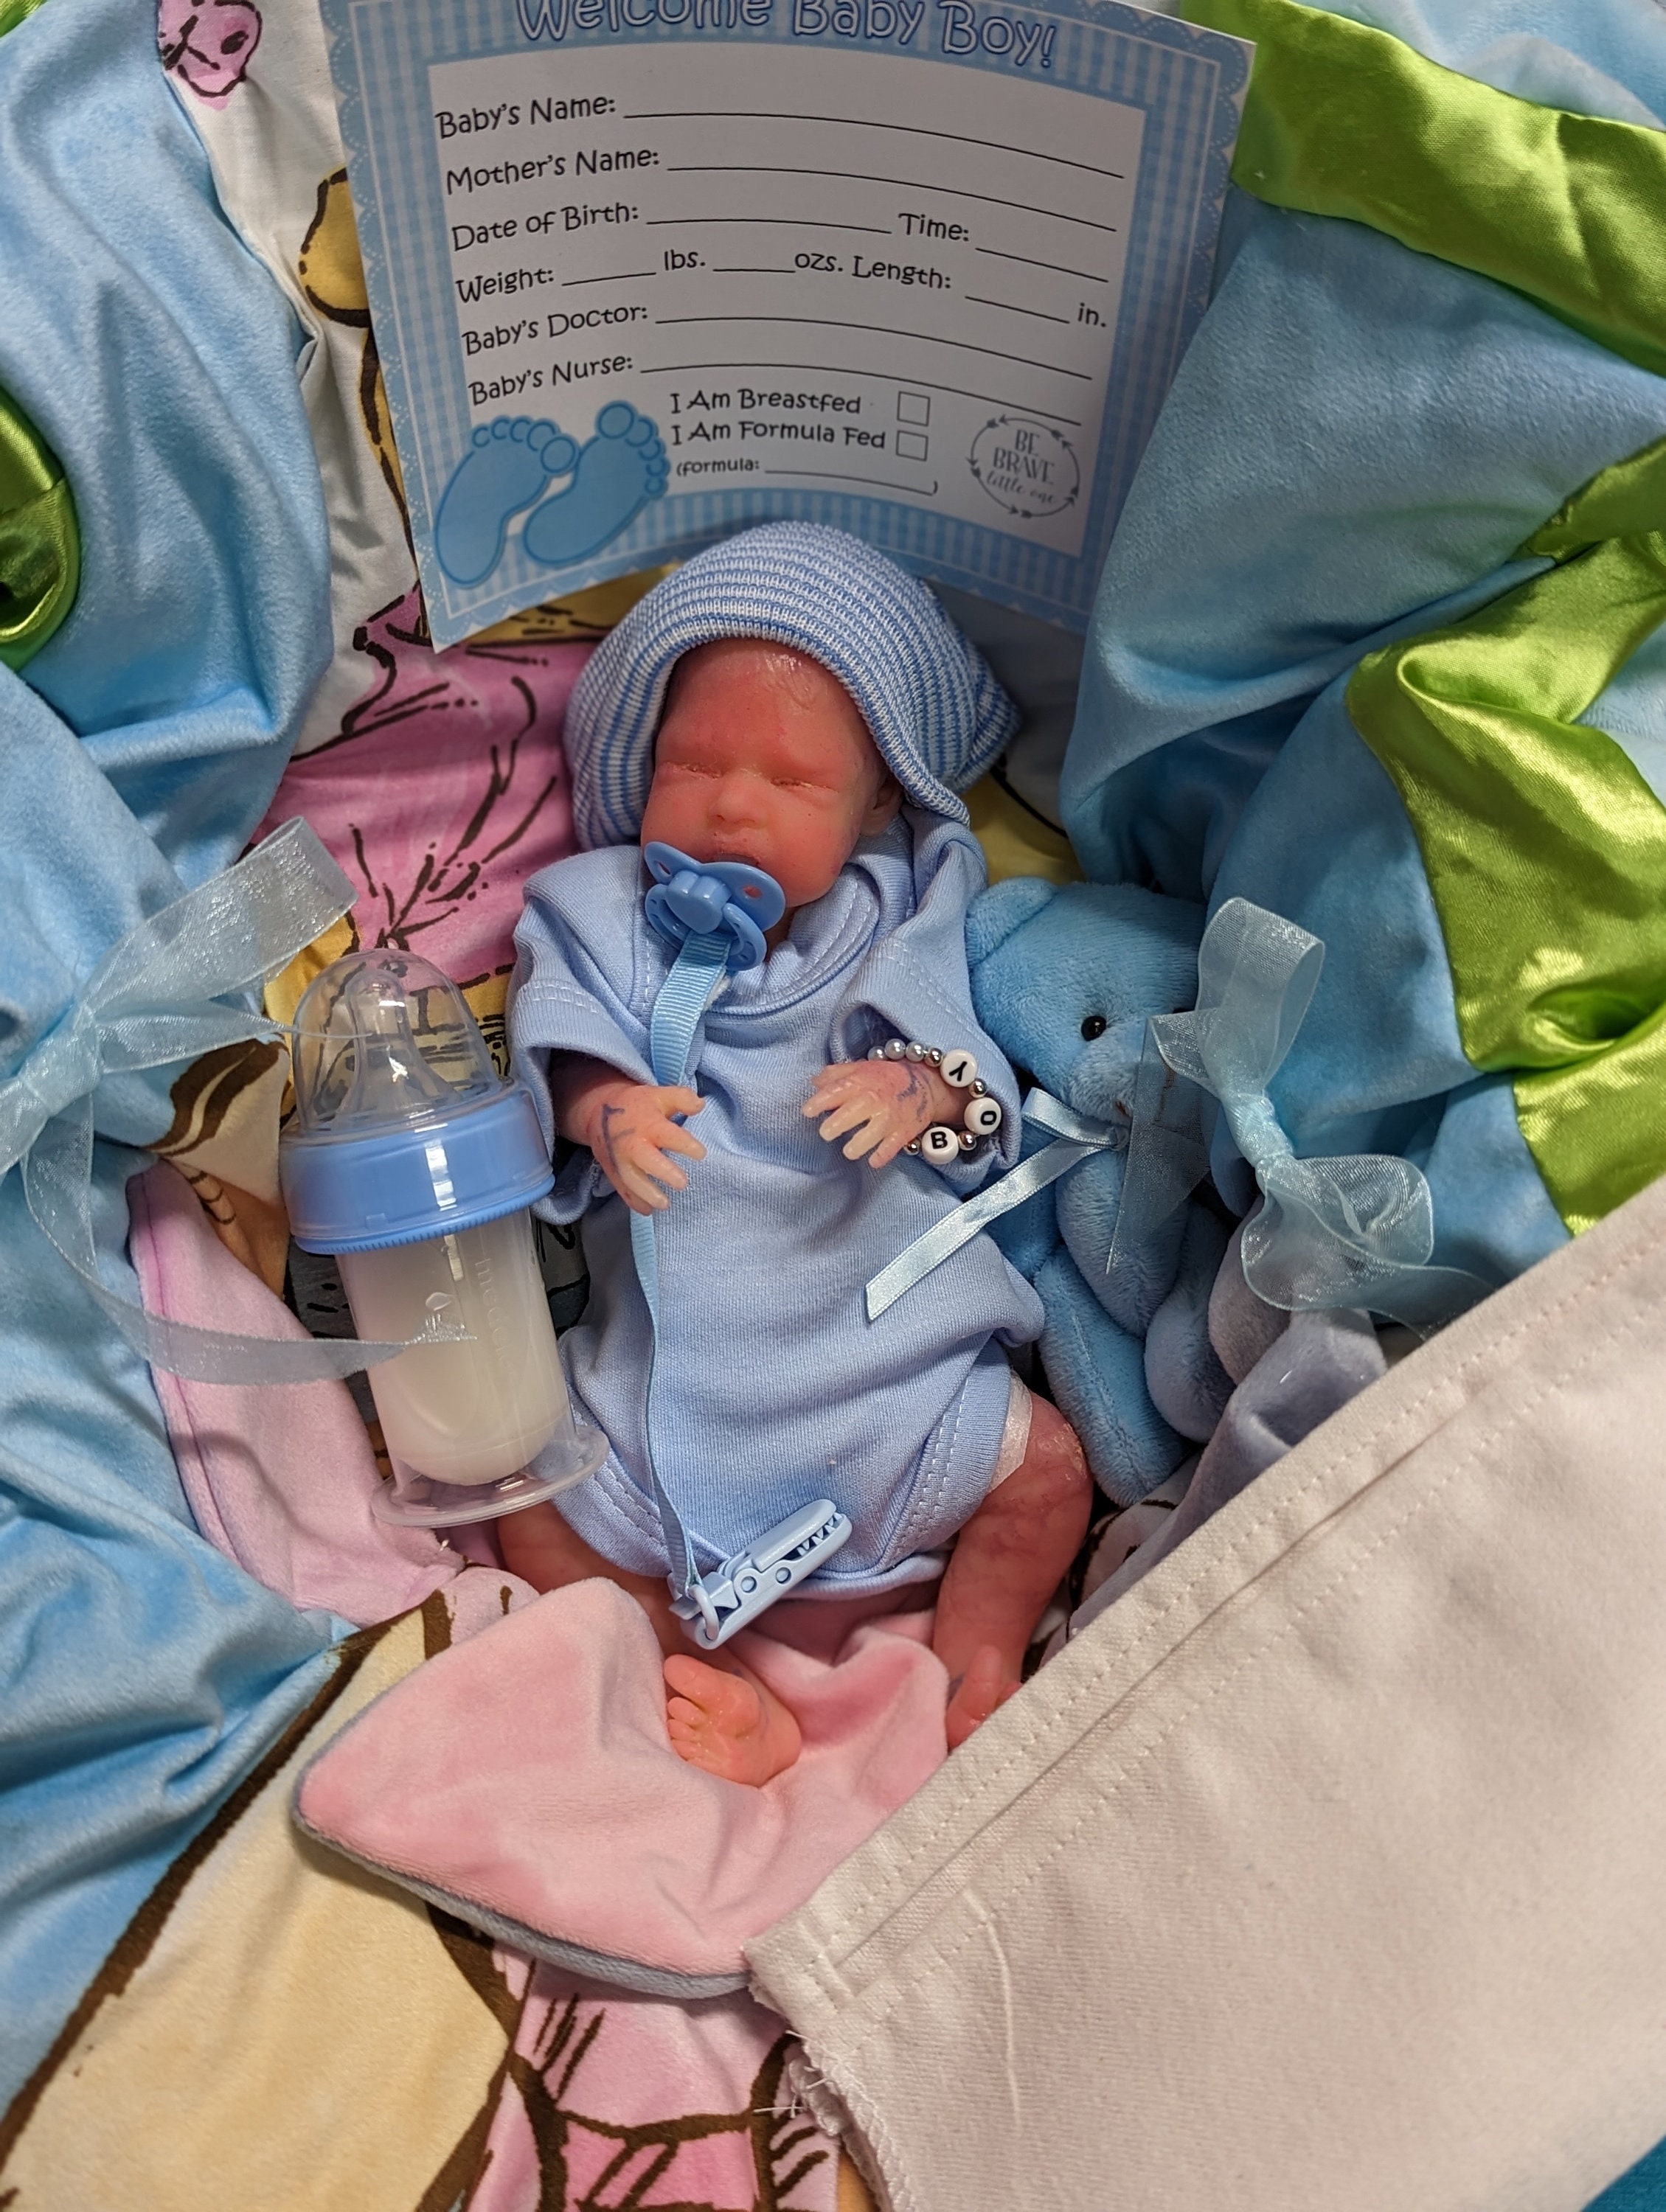 Calimero: Reborn baby boy made of full silicone - Designed by Ina Volprich